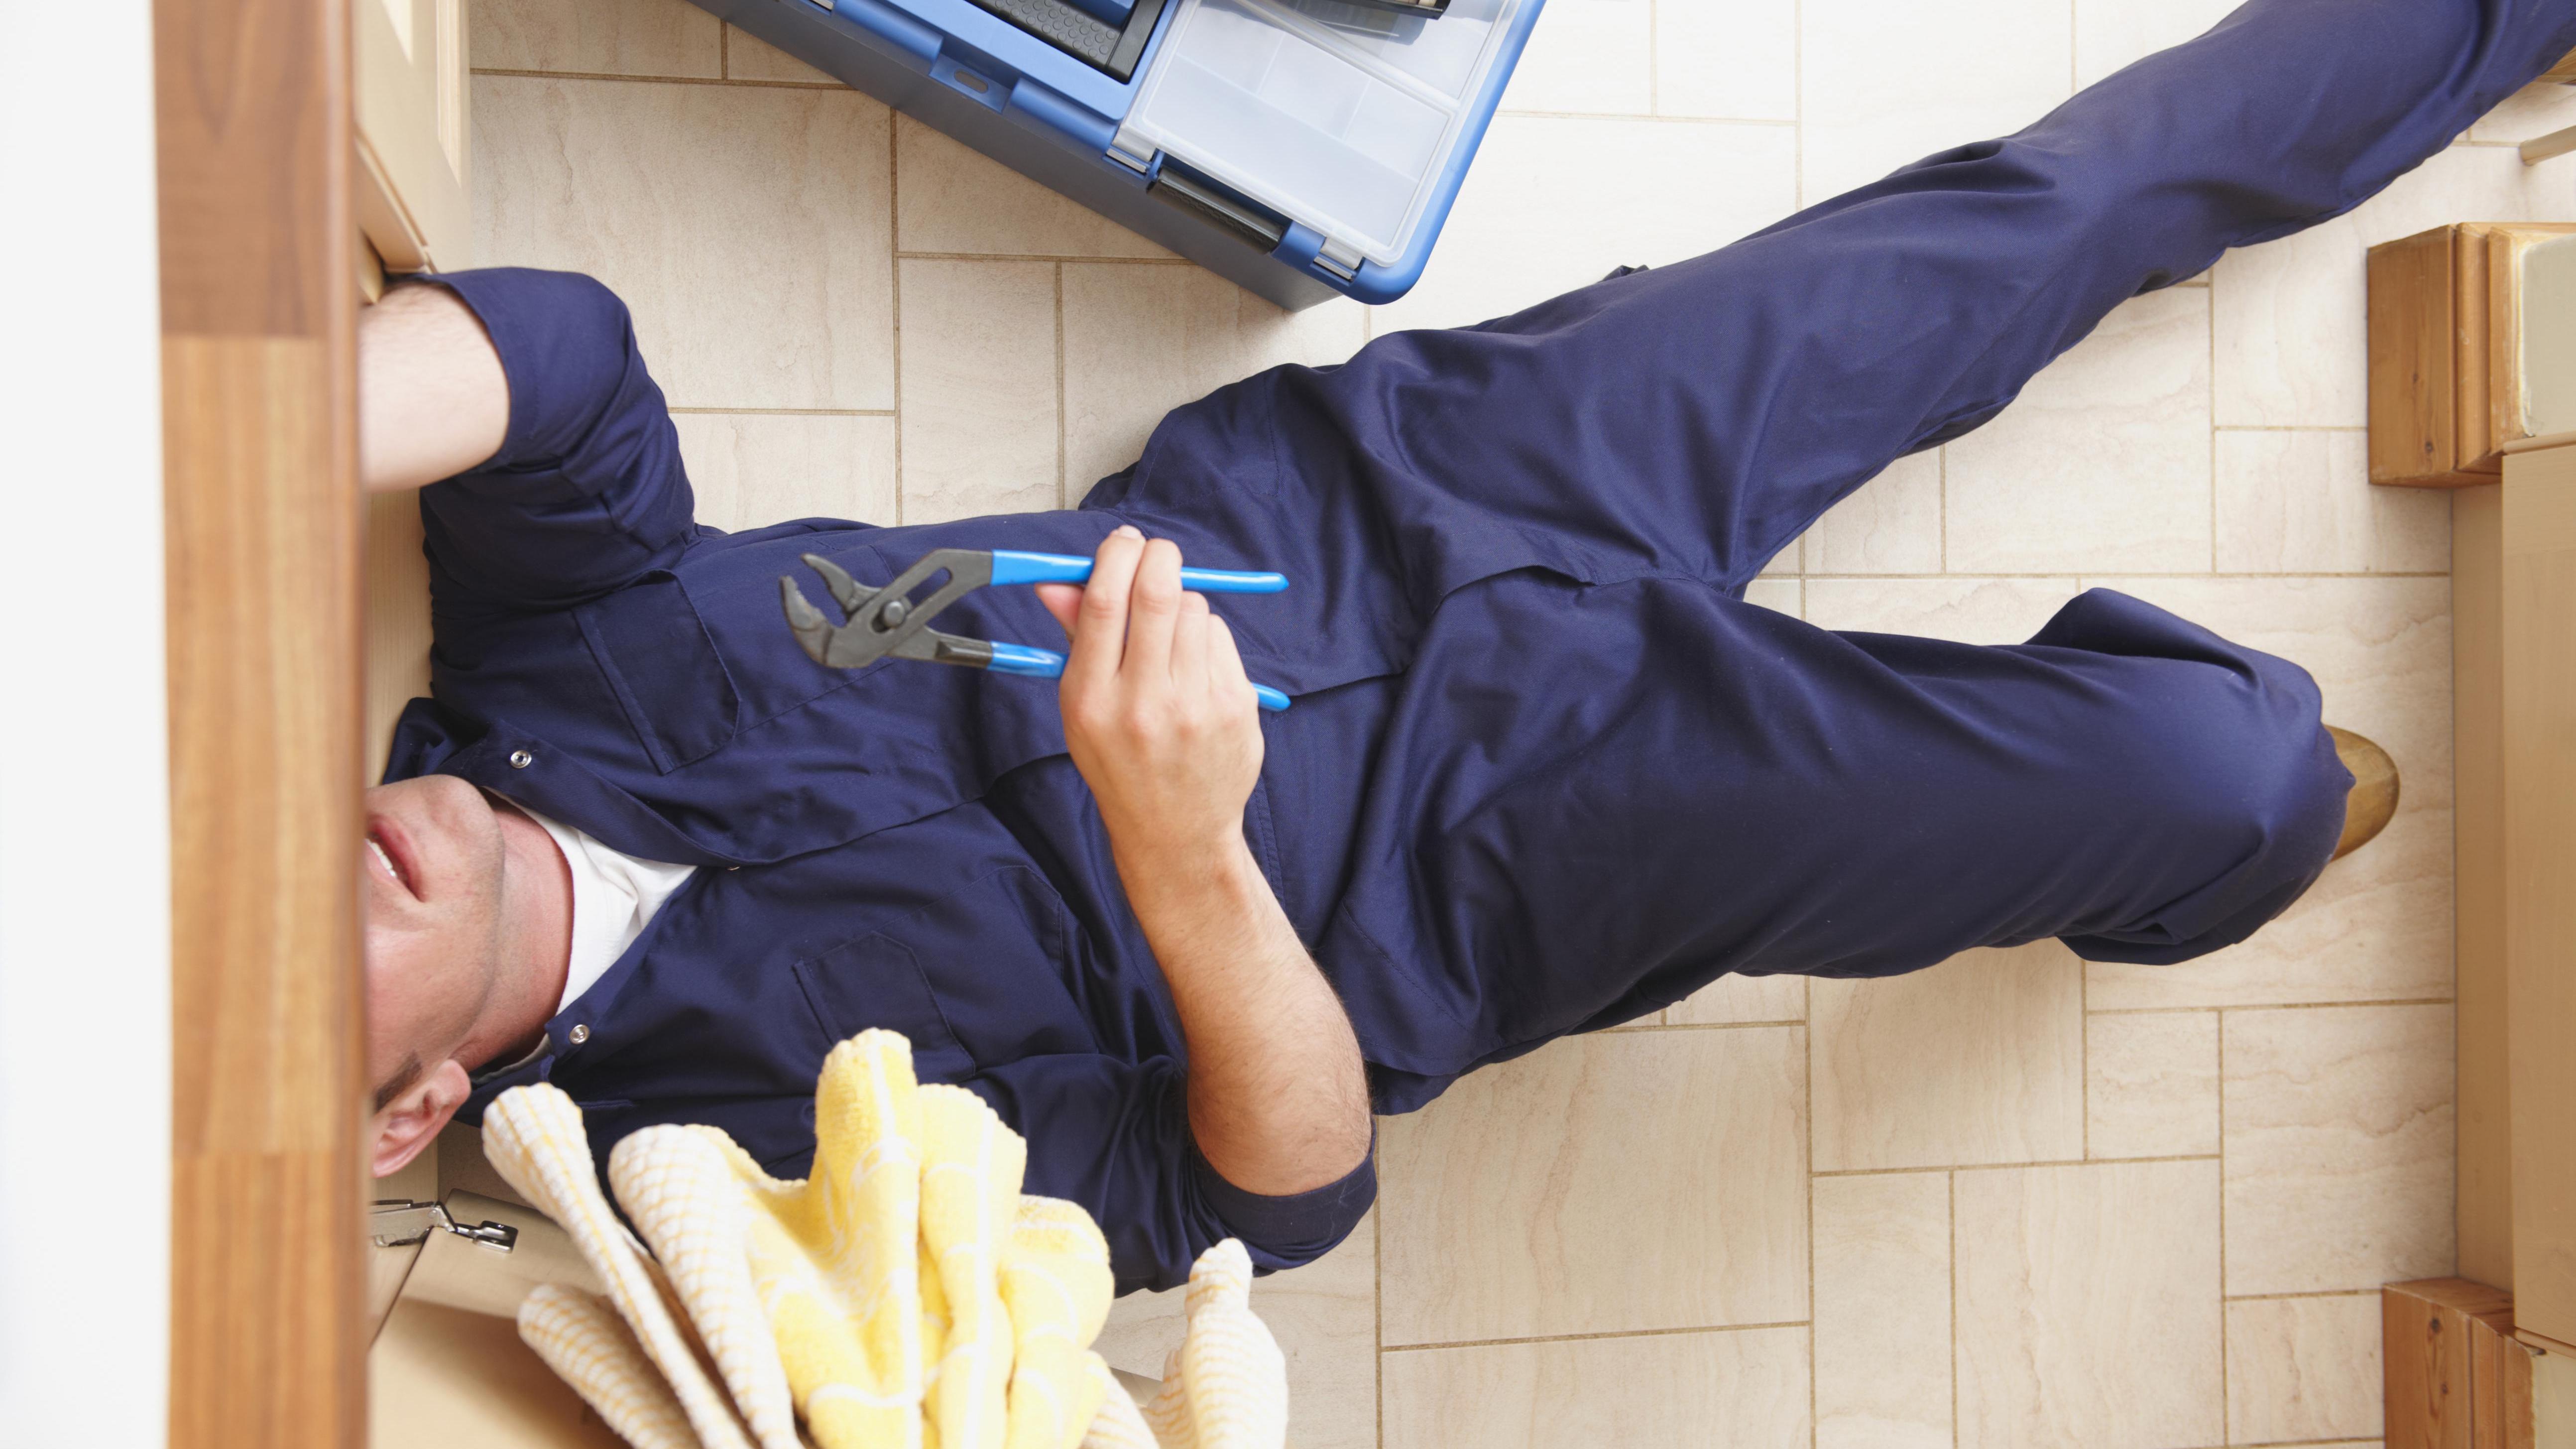 Why I quit my well-paid job in marketing to become a plumber